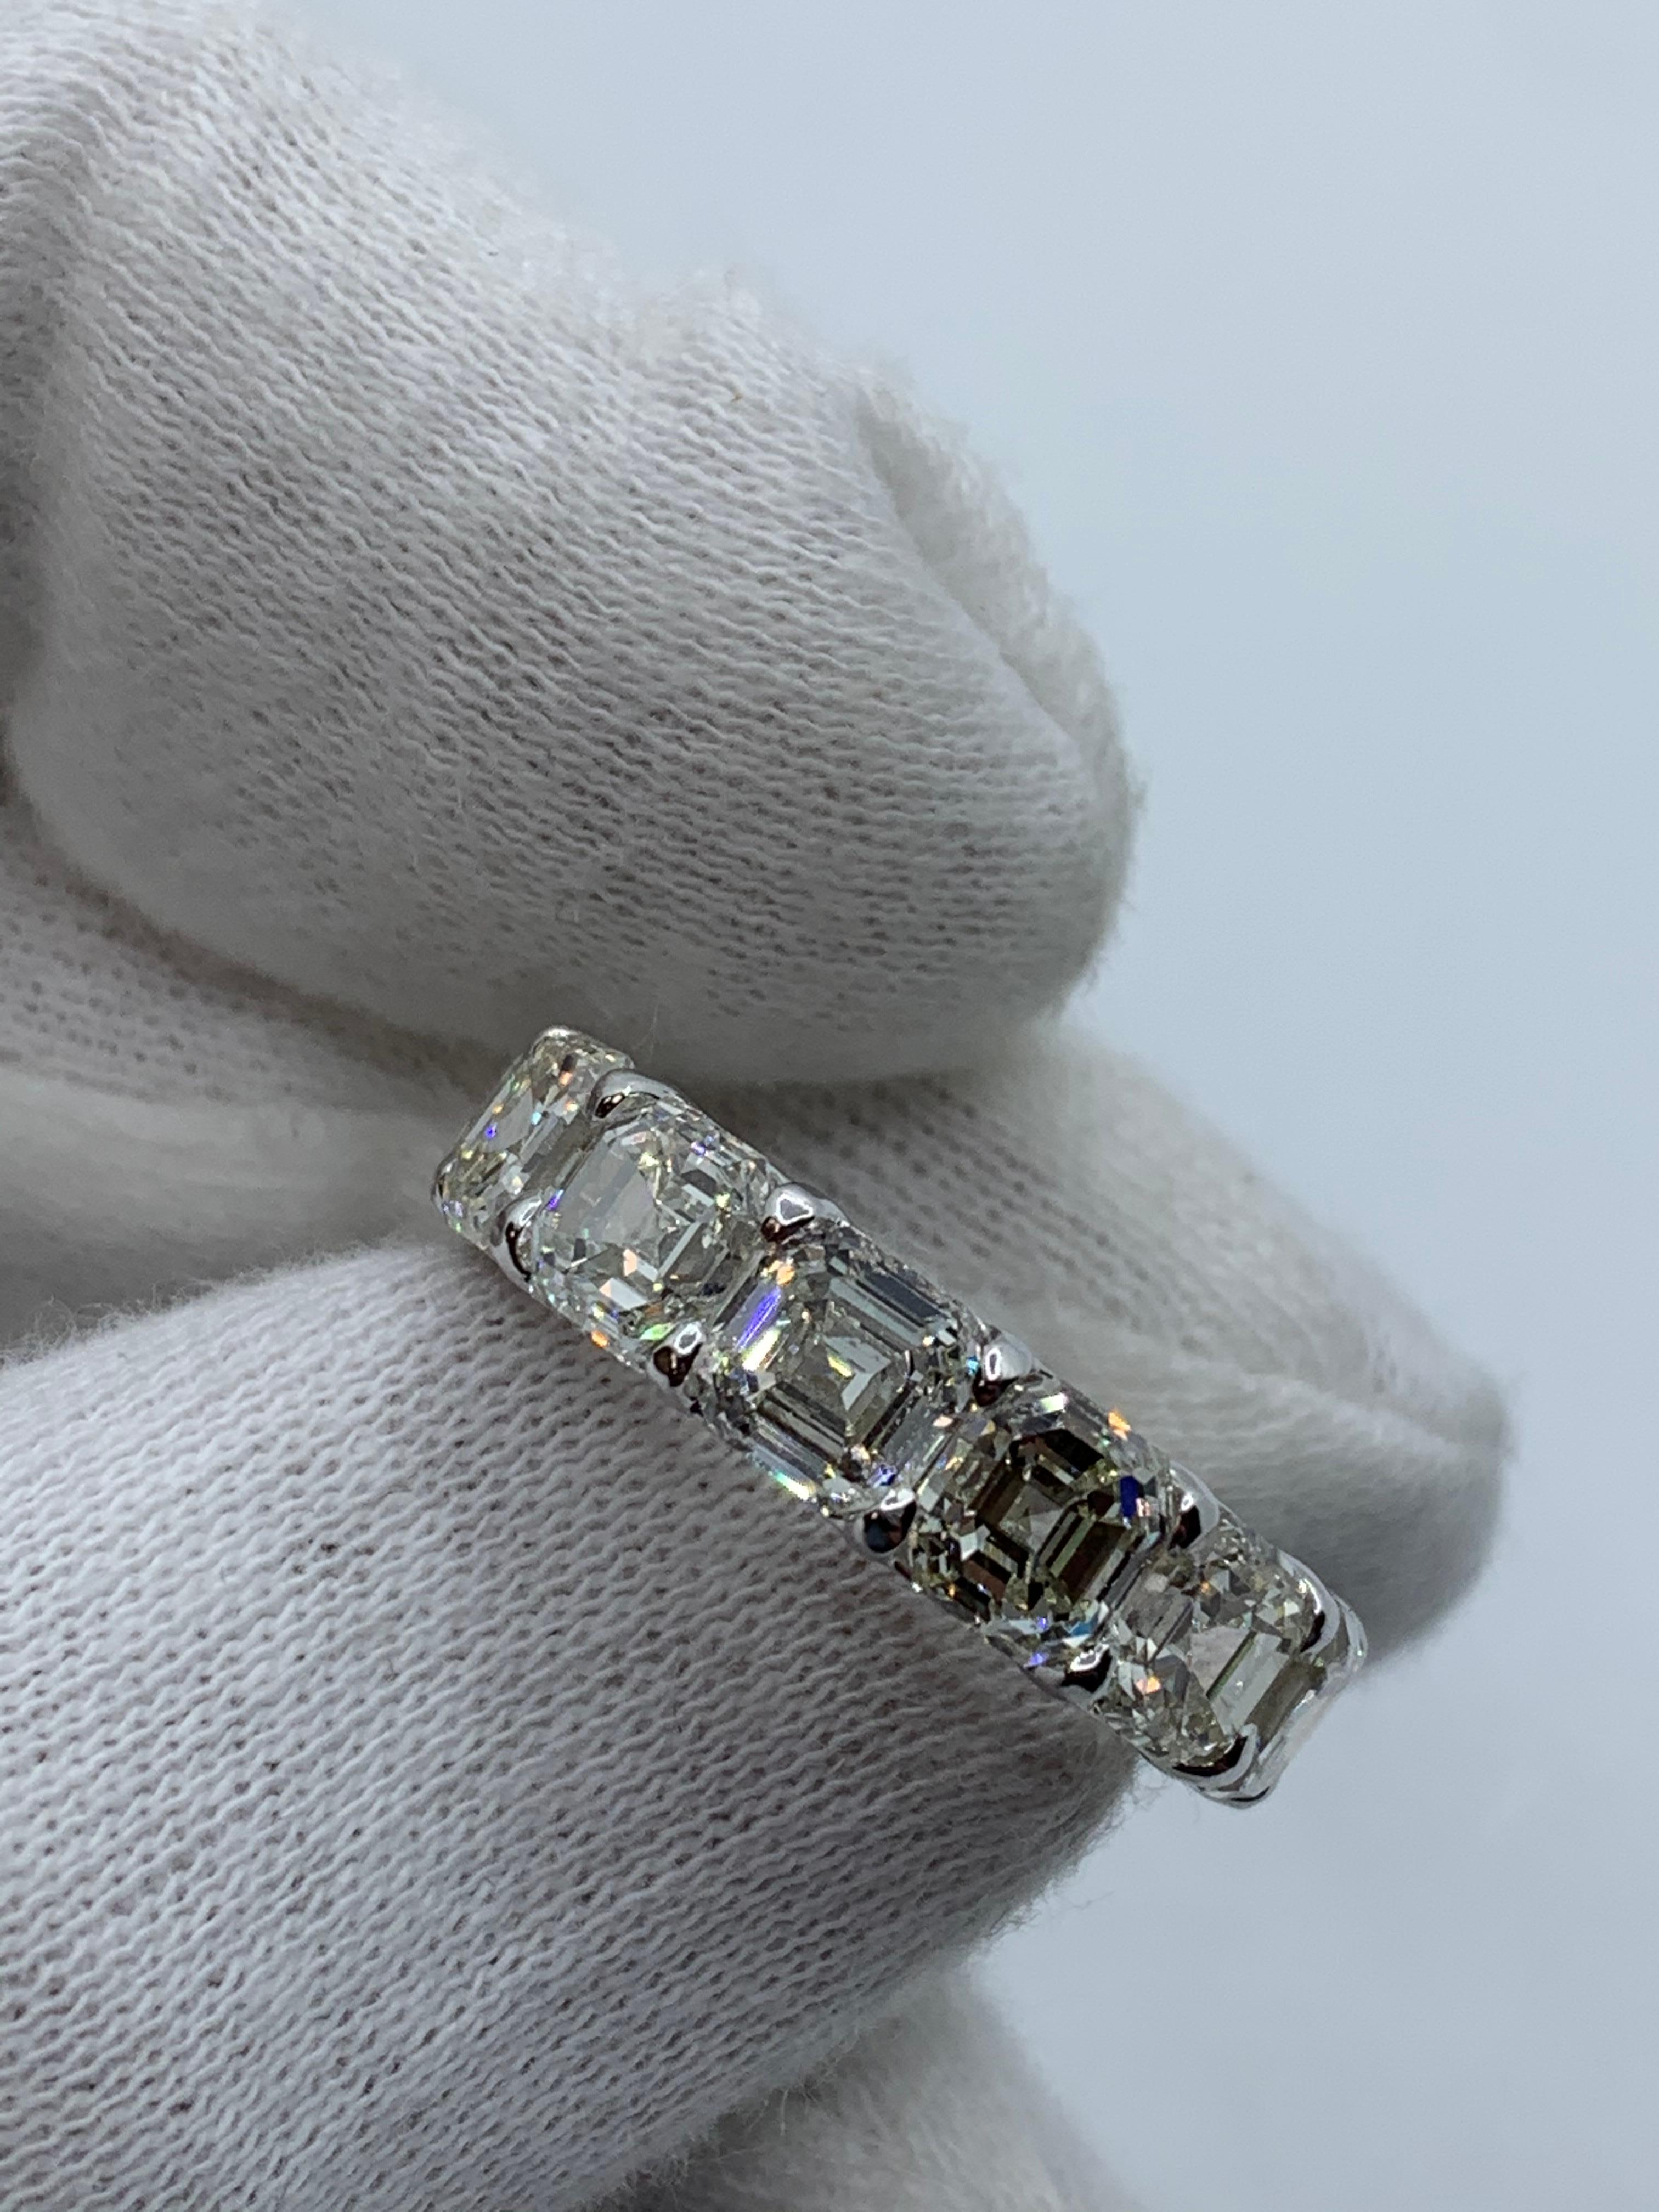 This beautiful Eternity Ring is set with 13 perfectly matched Asscher Cut Diamonds, each weighing between 1.0ct to 1.04ct for a total of 13.22 Carats. Made in New York City using Platinum 950. Fits US Size 6.5.

Diamonds are of I-J color and VS-VVS